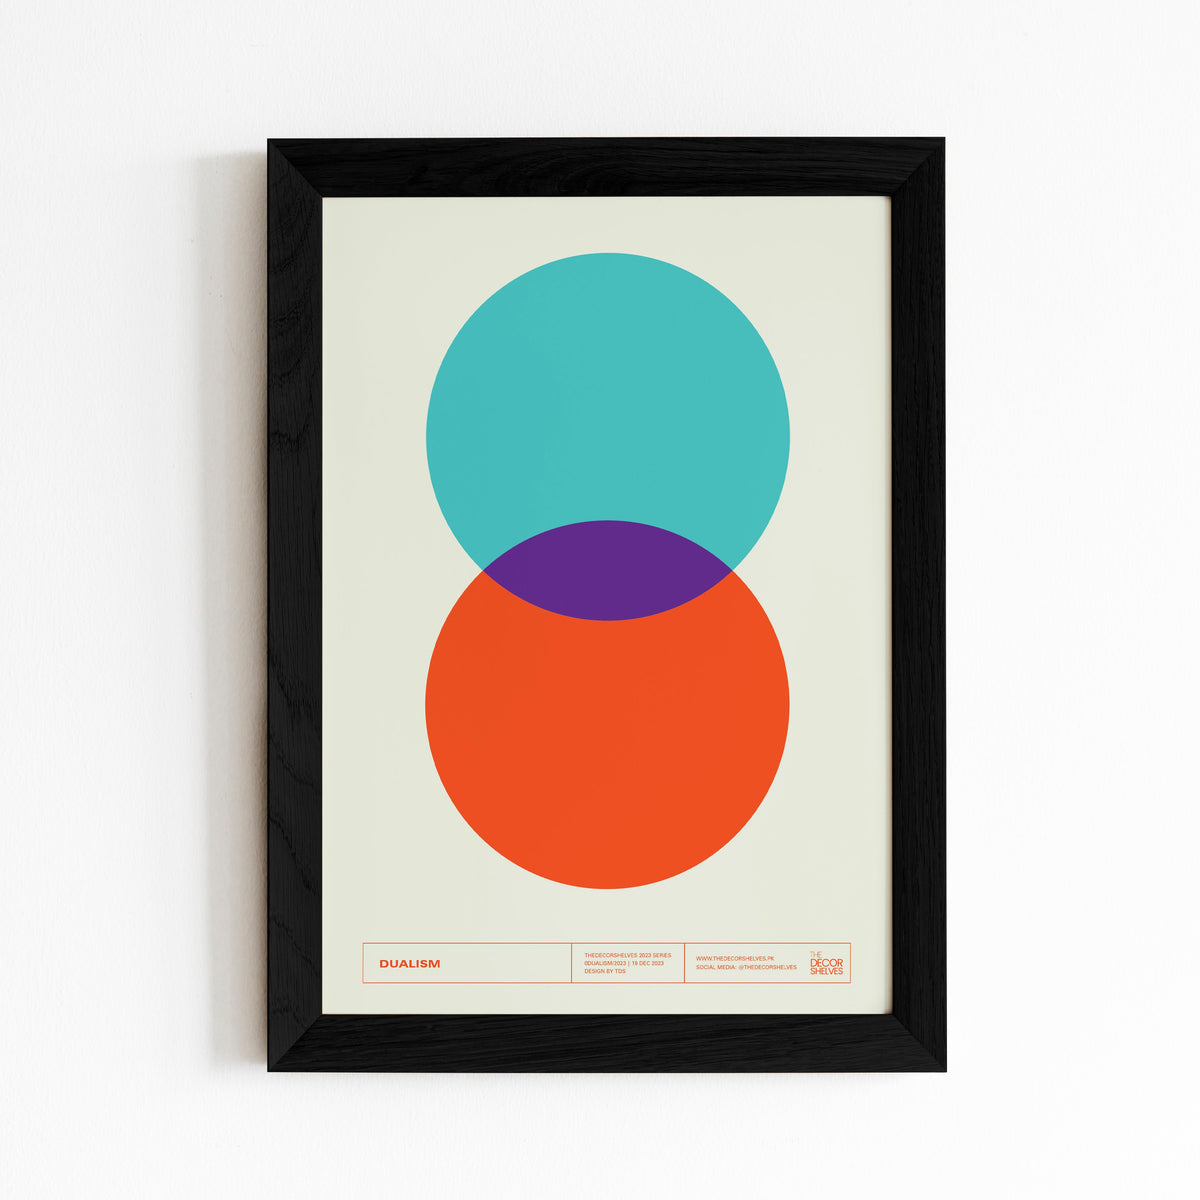 Dualism, wall frames, poster design, black frame, wall art, abstract art, frames, the decor shelves, home decor, room decor, decor ideas, black and white, geometrical, brown frame, 2024 poster, circles, Colour full poster, trending posters